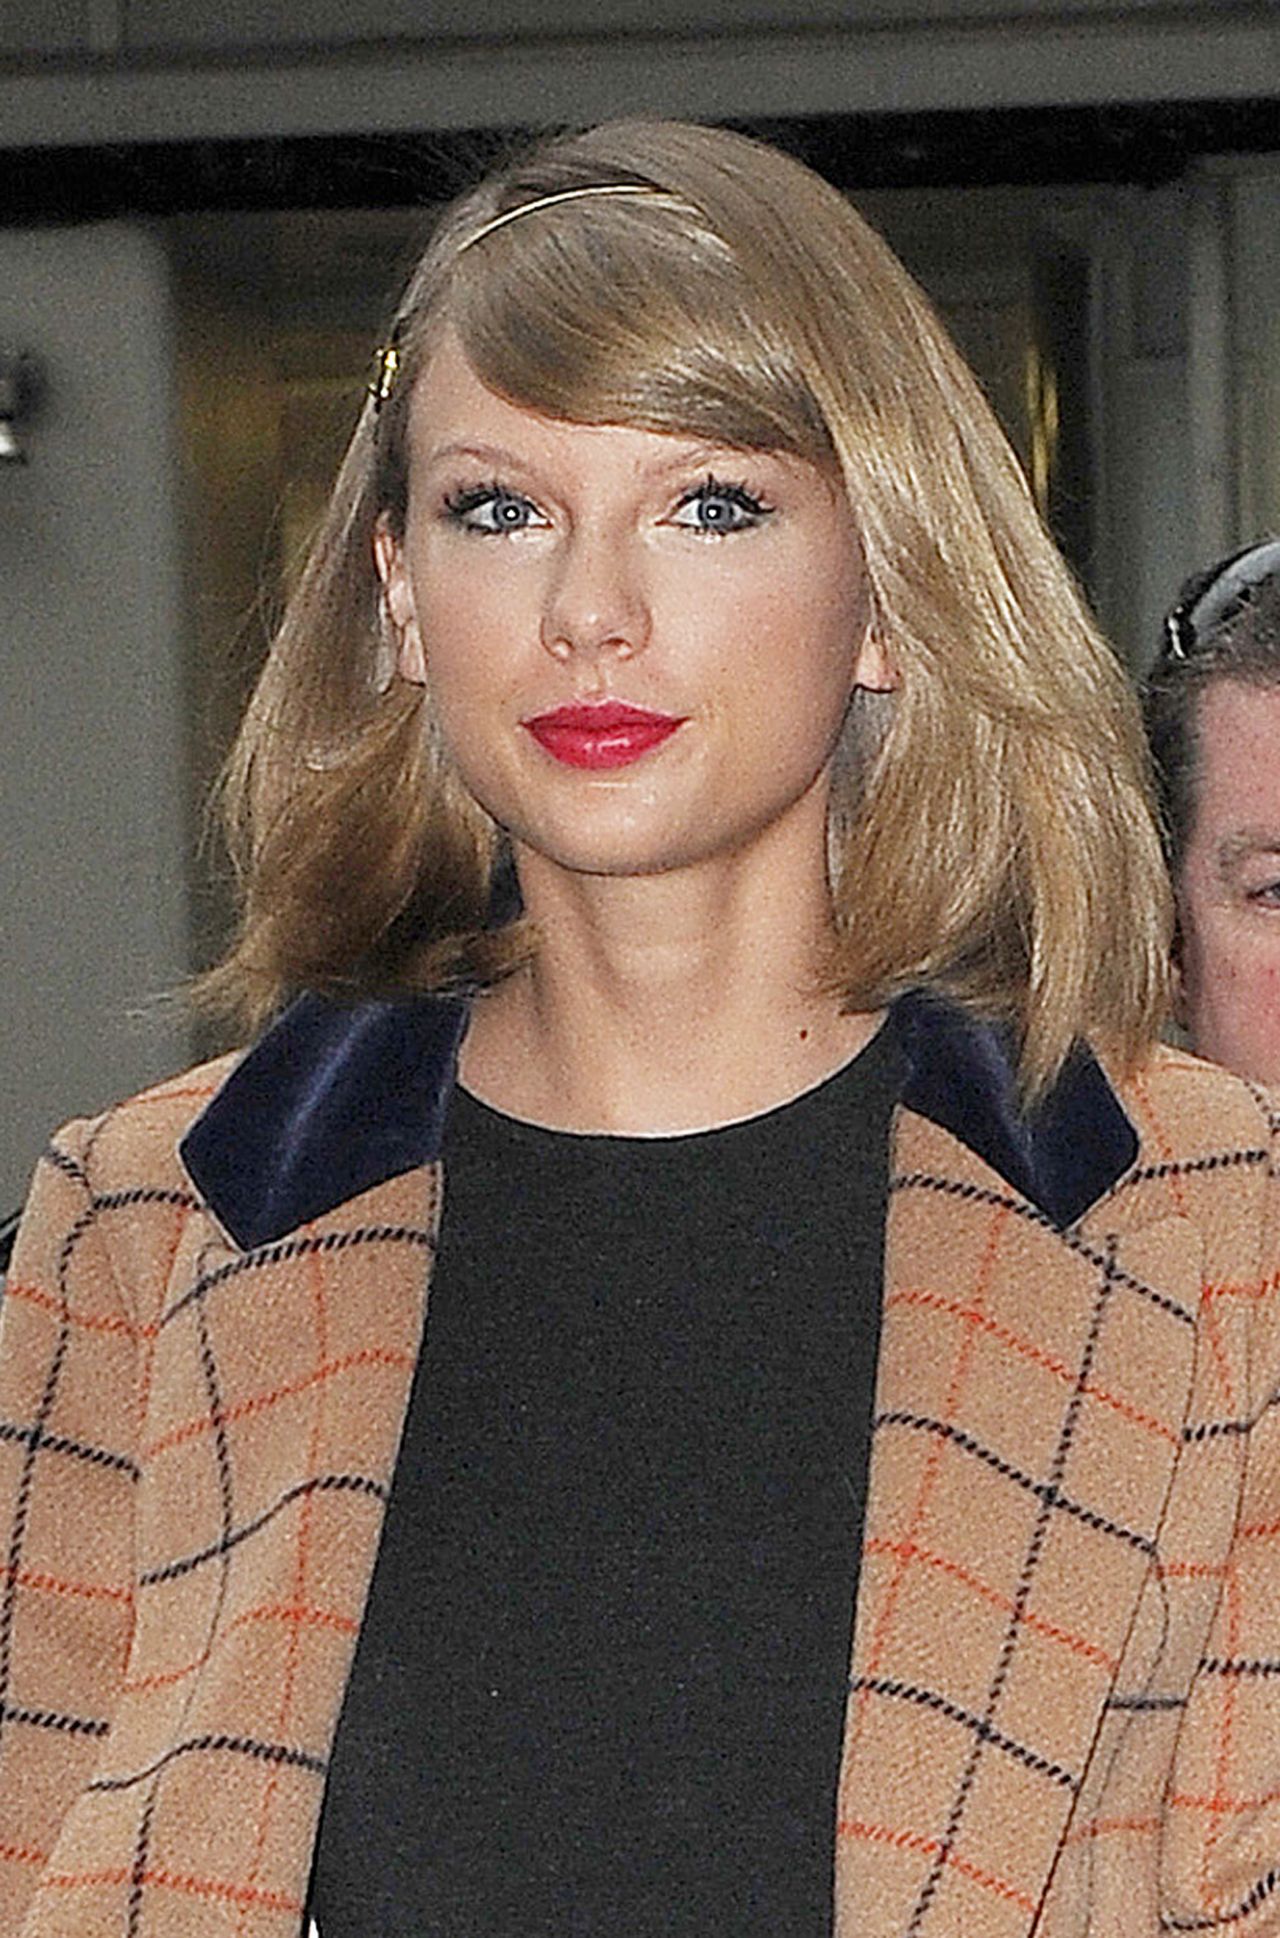 Taylor Swift Street Fashion - Out in New York City - November 2014 ...